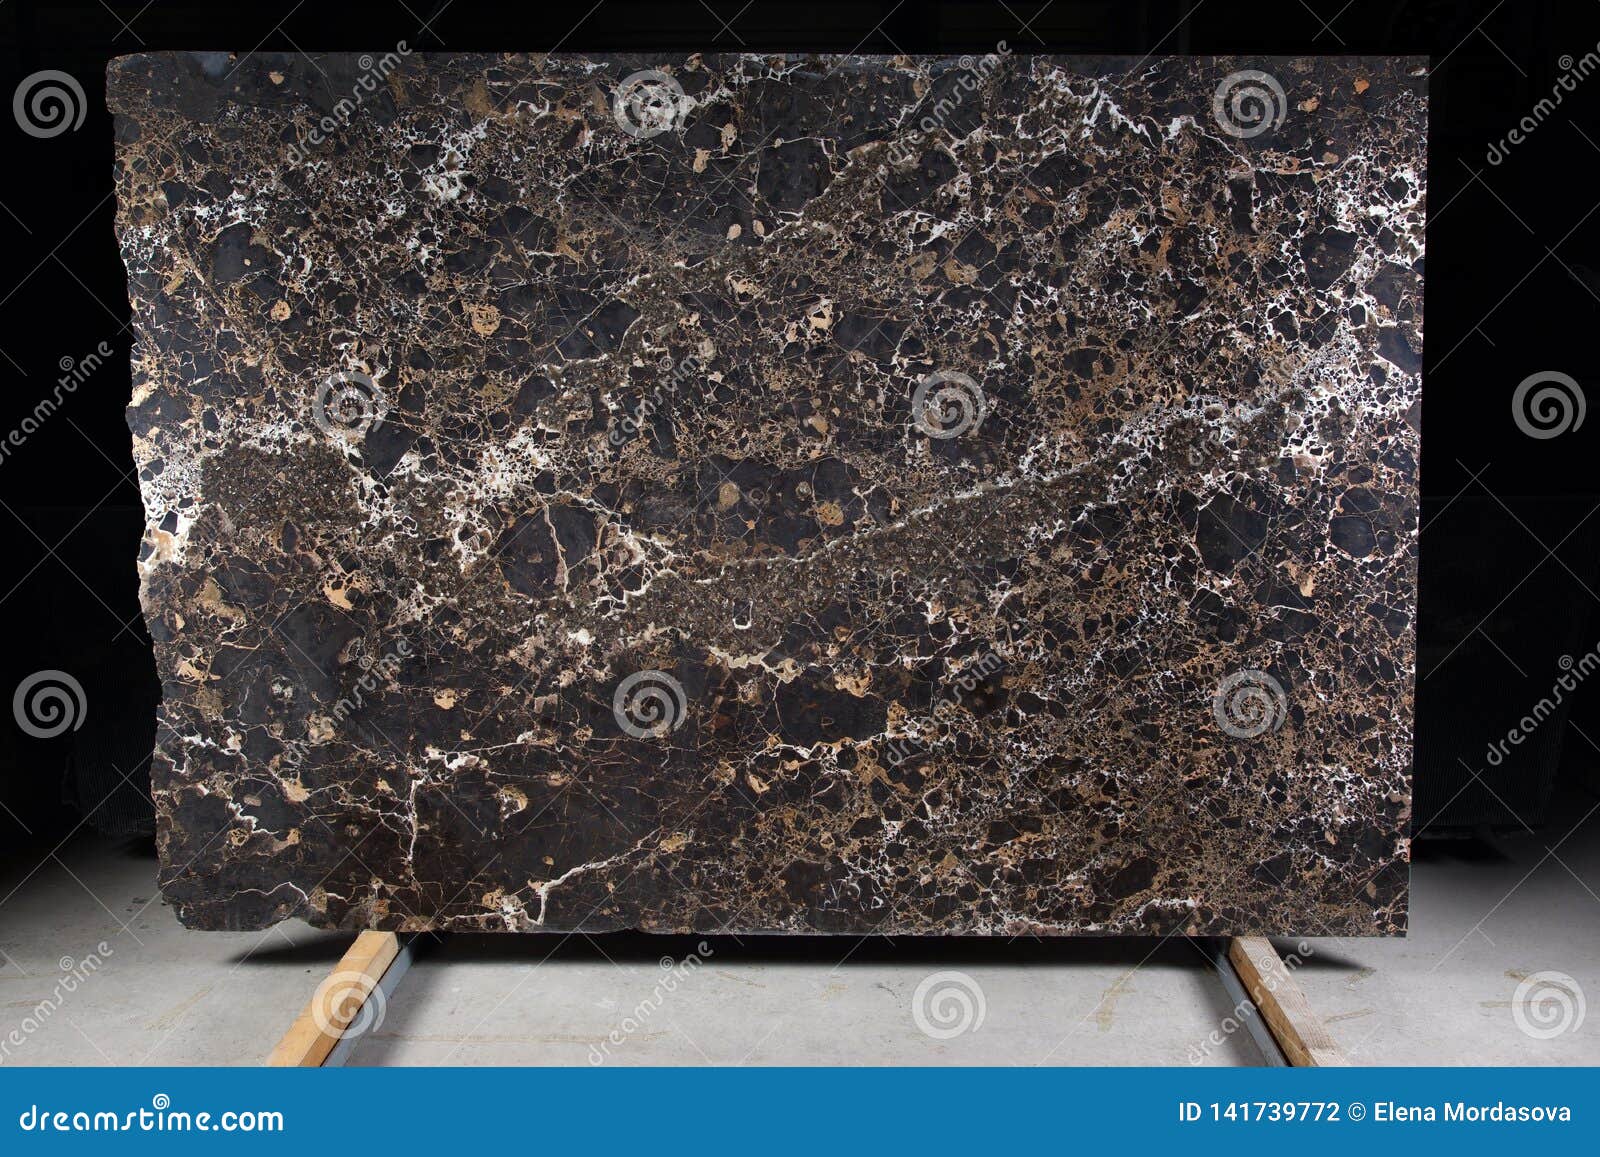 beautiful brown marble, natural stone for interior work, is called emperador gold